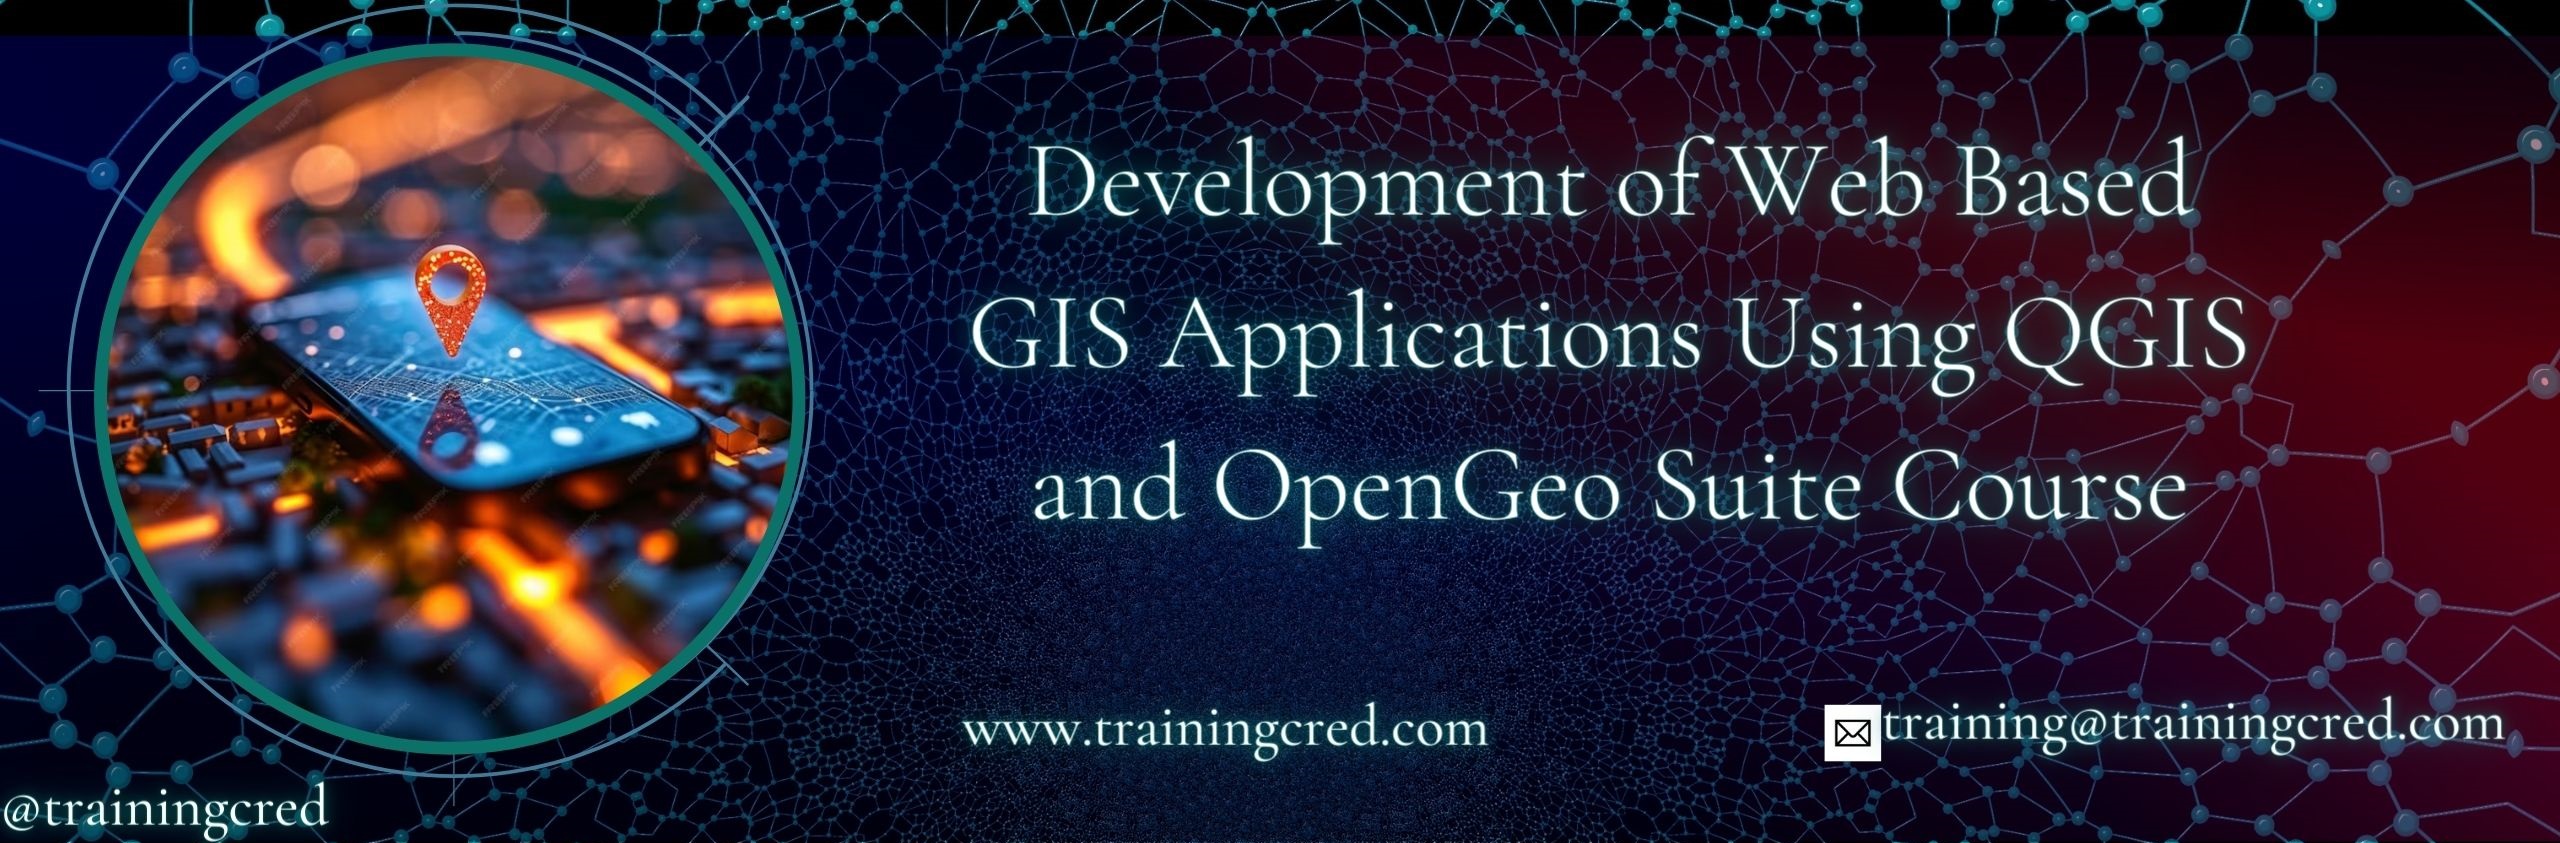 Development of Web Based GIS Applications Using QGIS and OpenGeo Suite Training